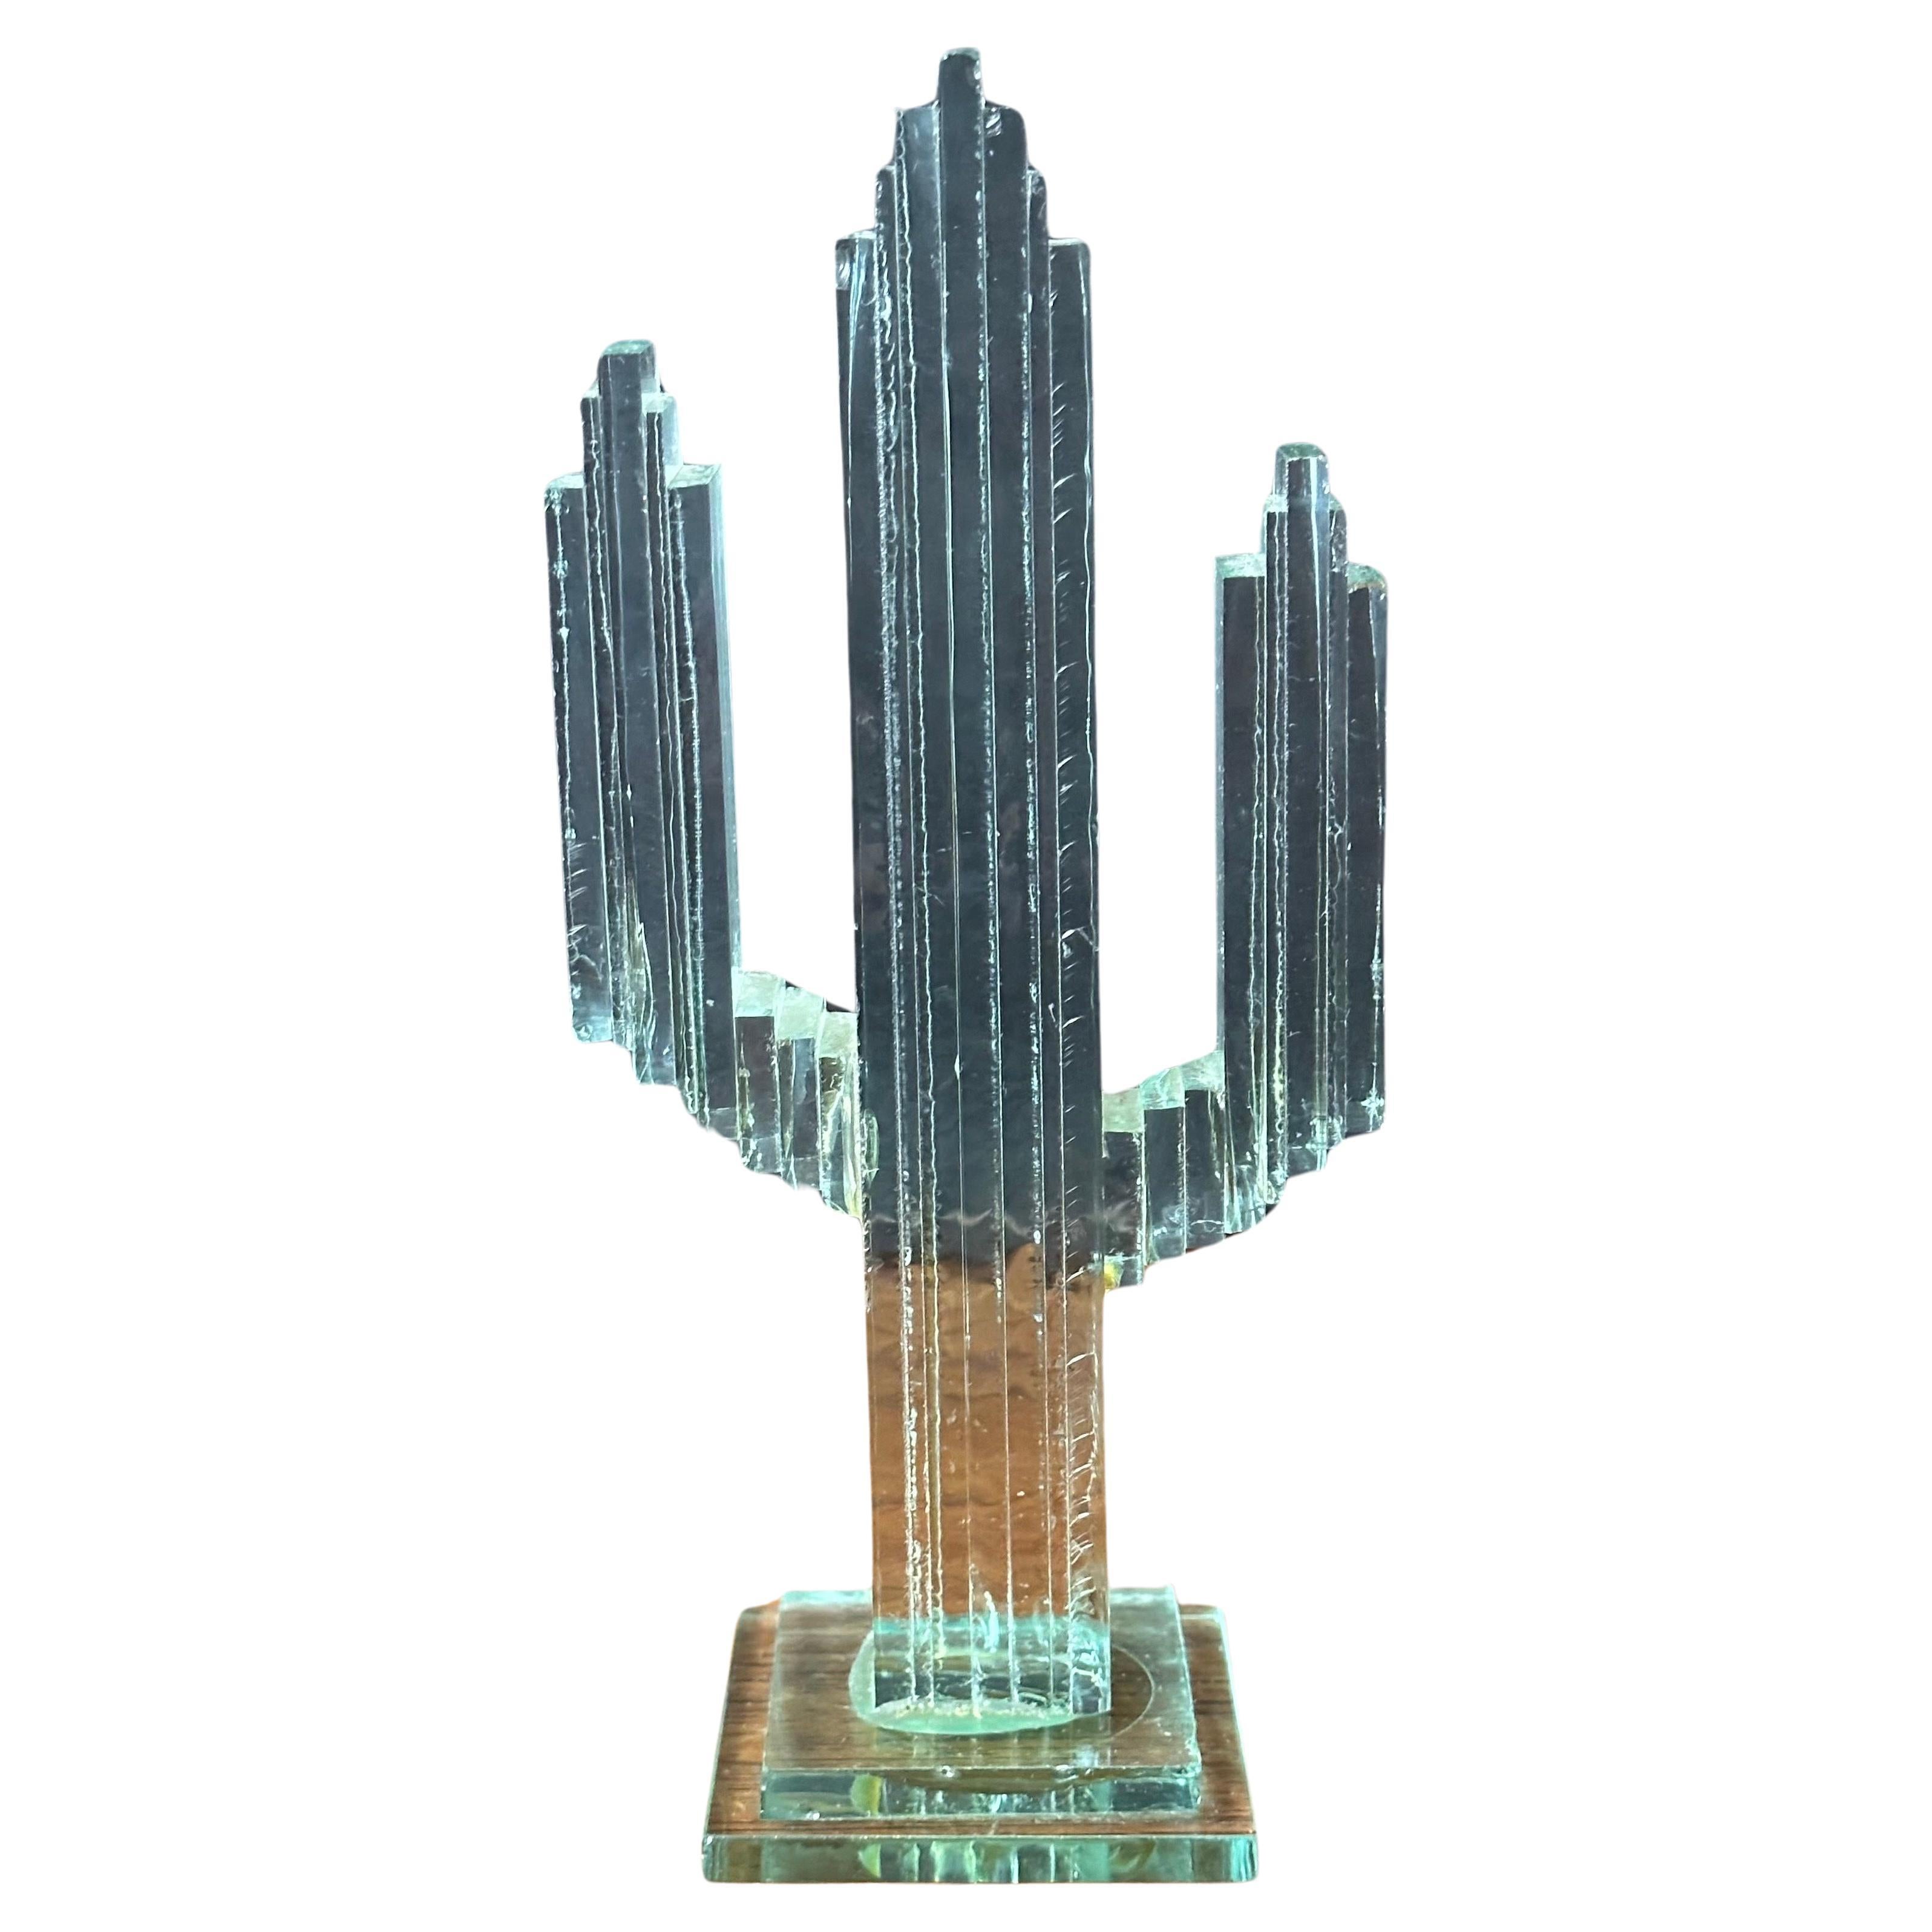 A very cool stacked glass panel saguaro cactus sculpture, circa 1980s.   The piece is hand made by gluing stacked panels of glass, it is in very good condition with bo chips or cracks and measures 3.75